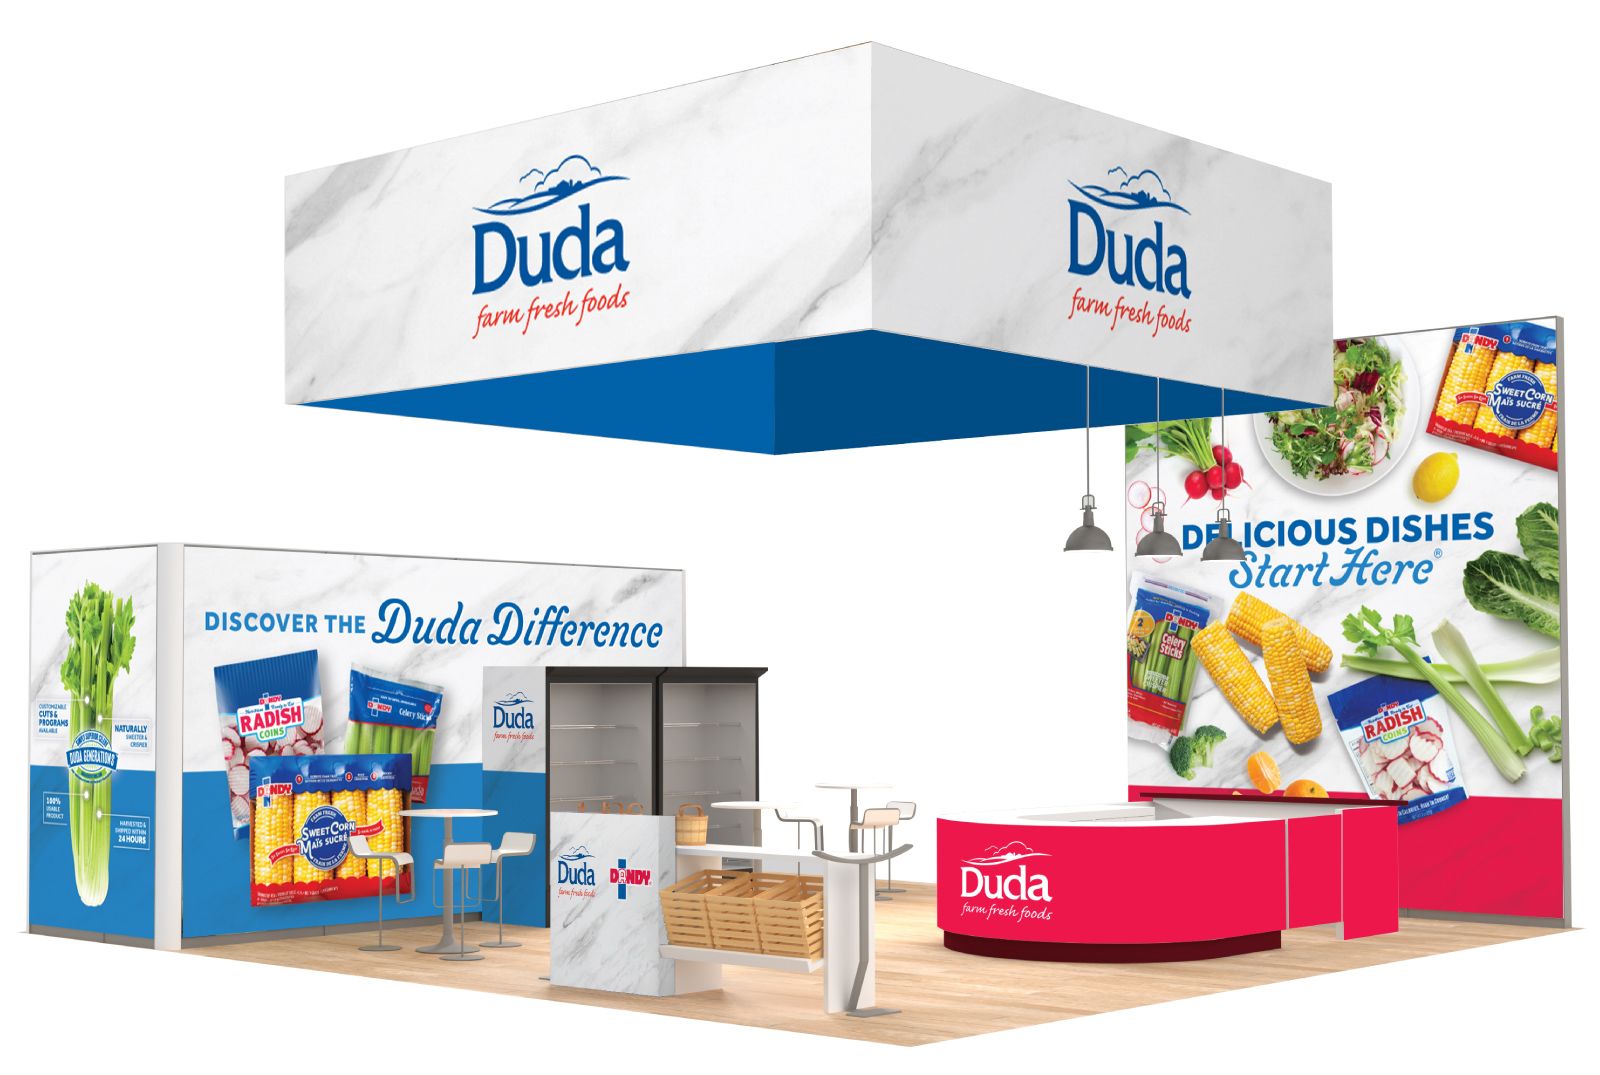 A mock-up of a tradeshow booth with images of Dandy products, the Duda and Dandy logos, and text that says "Delicious Dishes Start Here®"